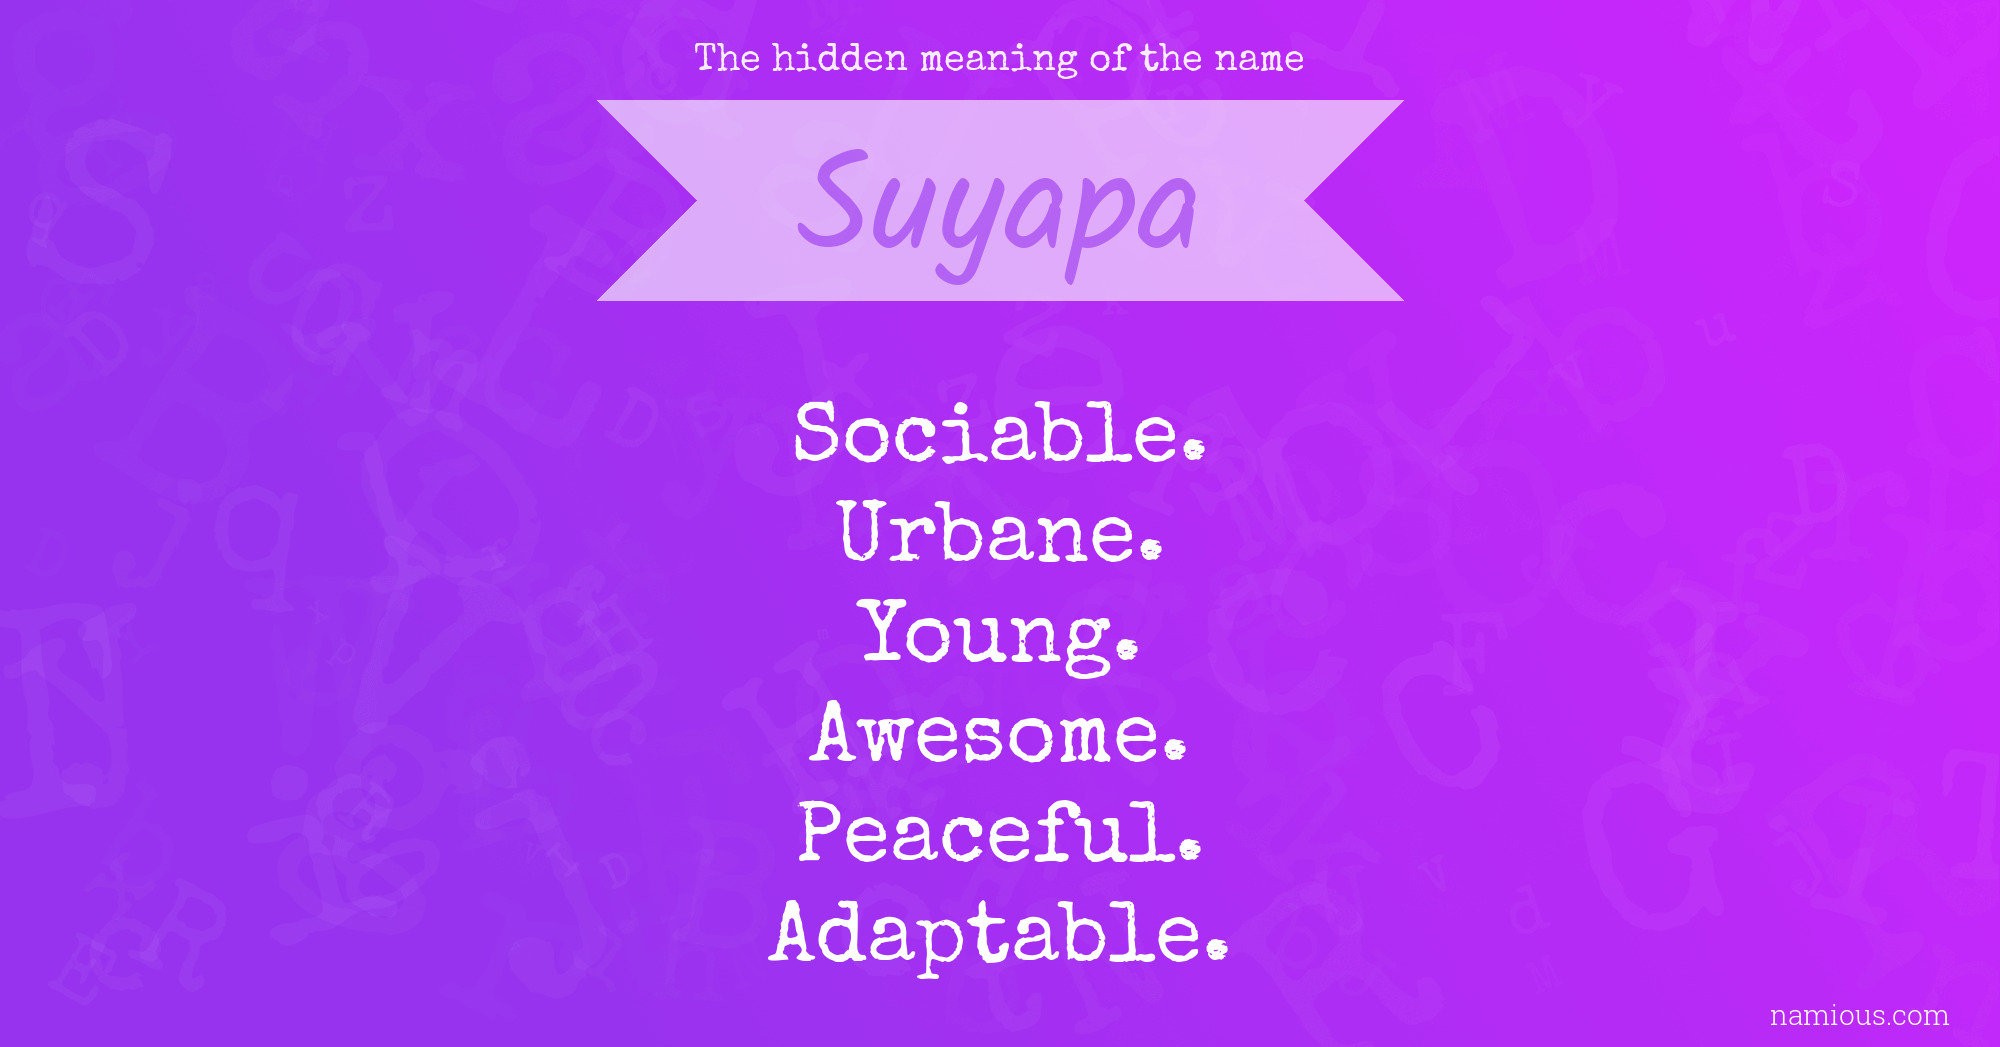 The hidden meaning of the name Suyapa